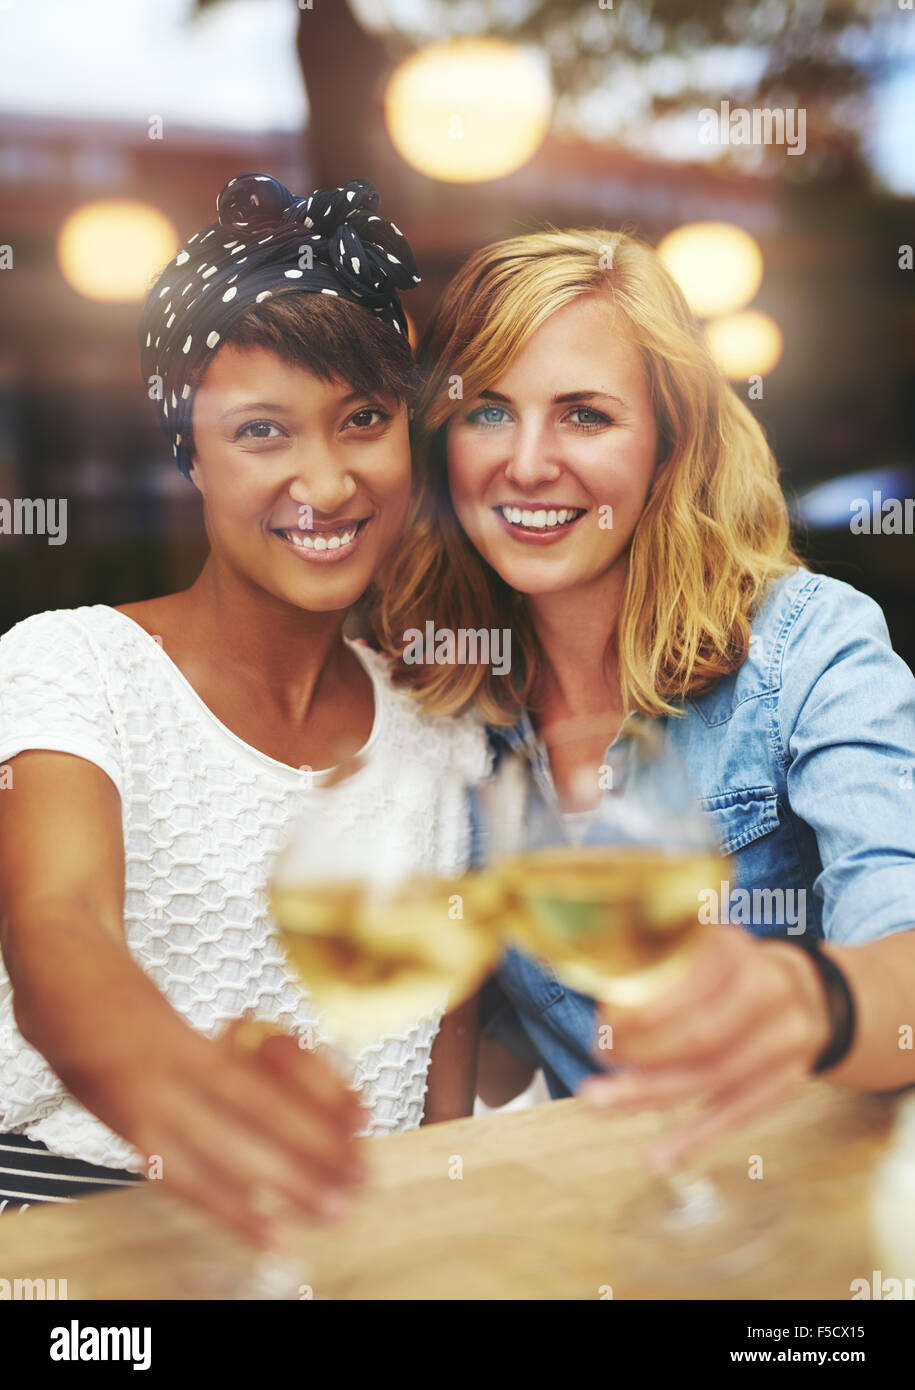 Fun attractive young female friends celebrating with white wine clinking their glasses in a toast as they smile at thecamera, mu Stock Photo